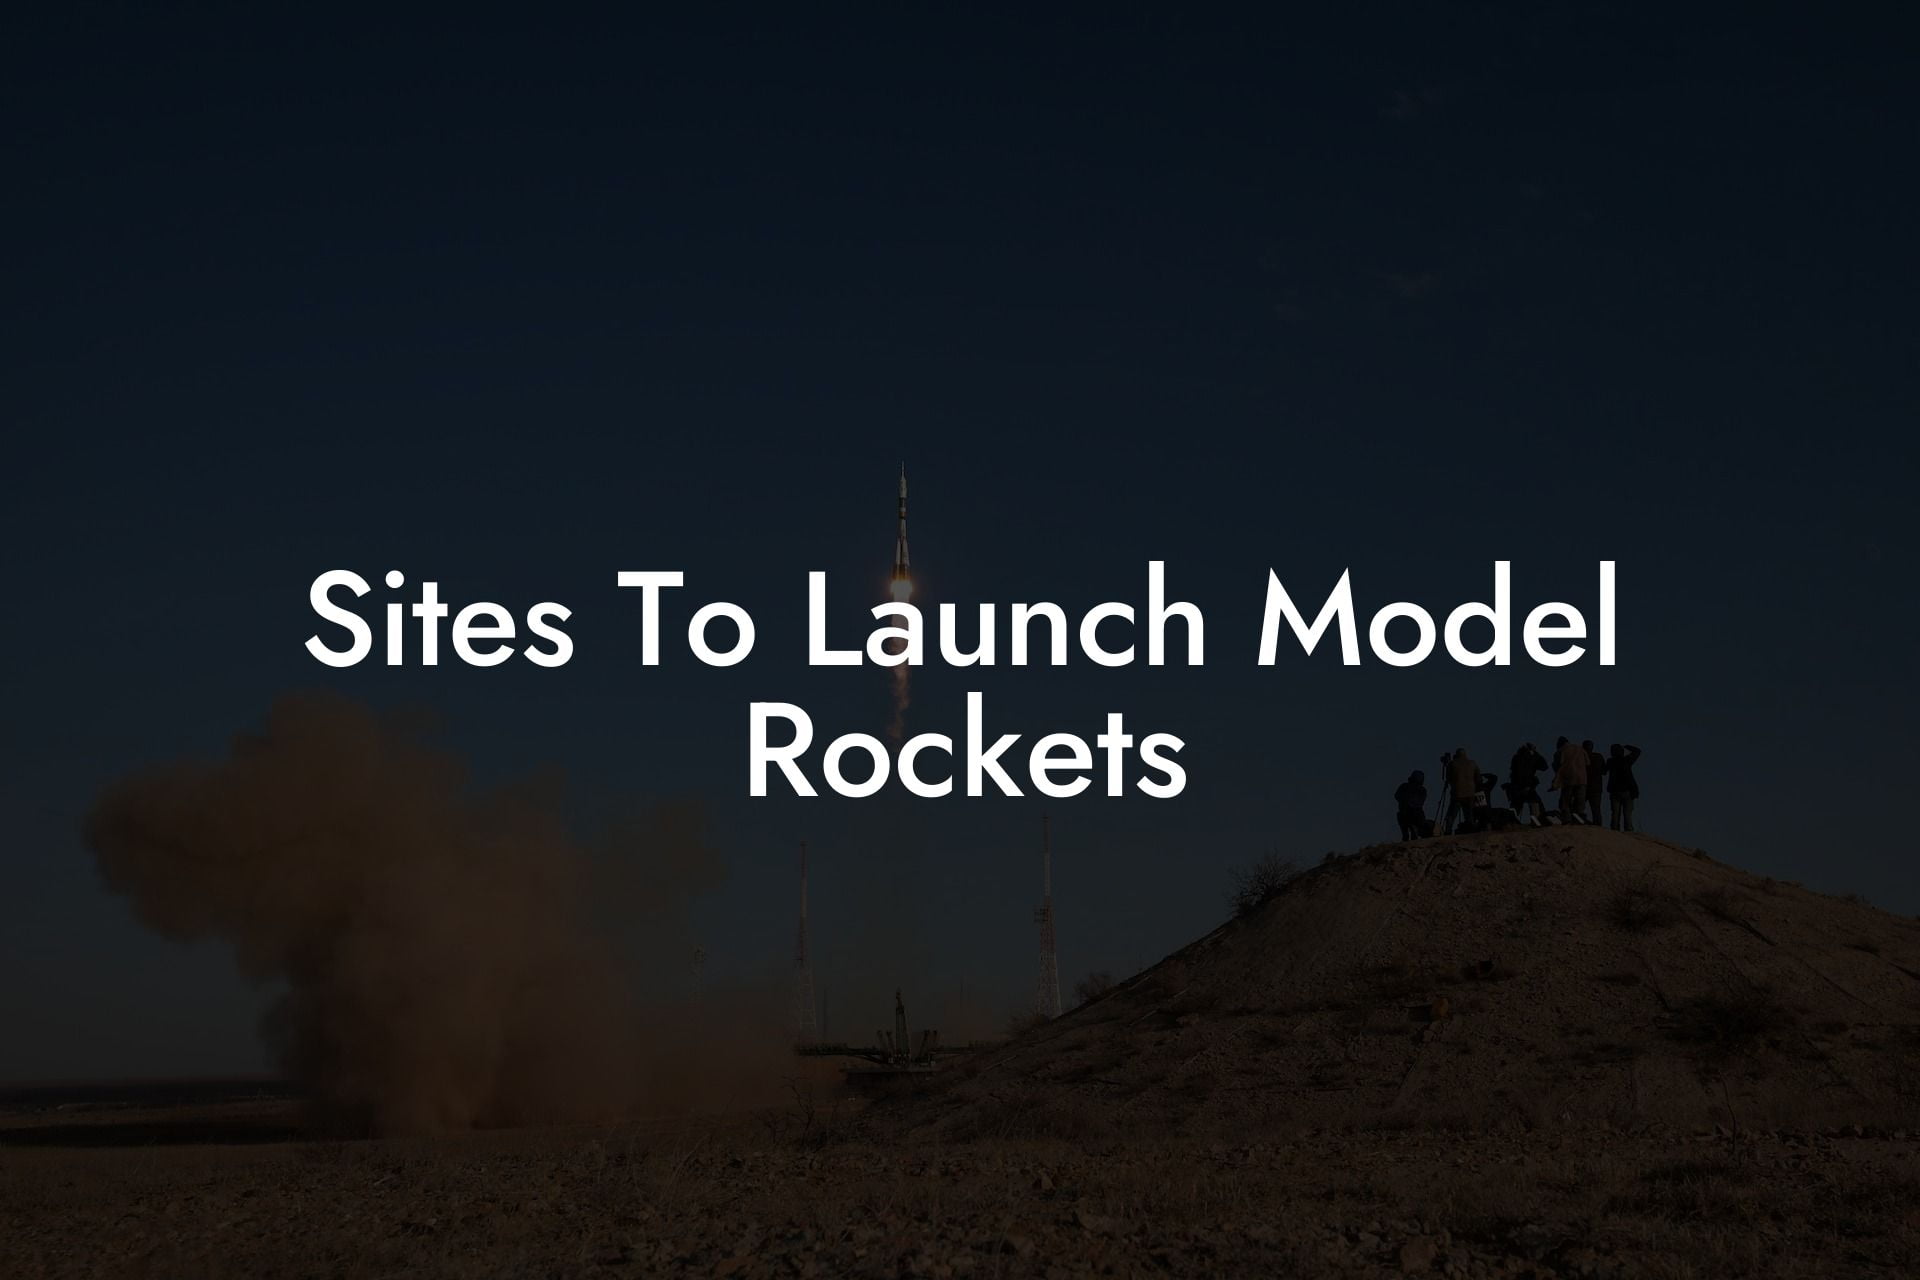 Sites To Launch Model Rockets